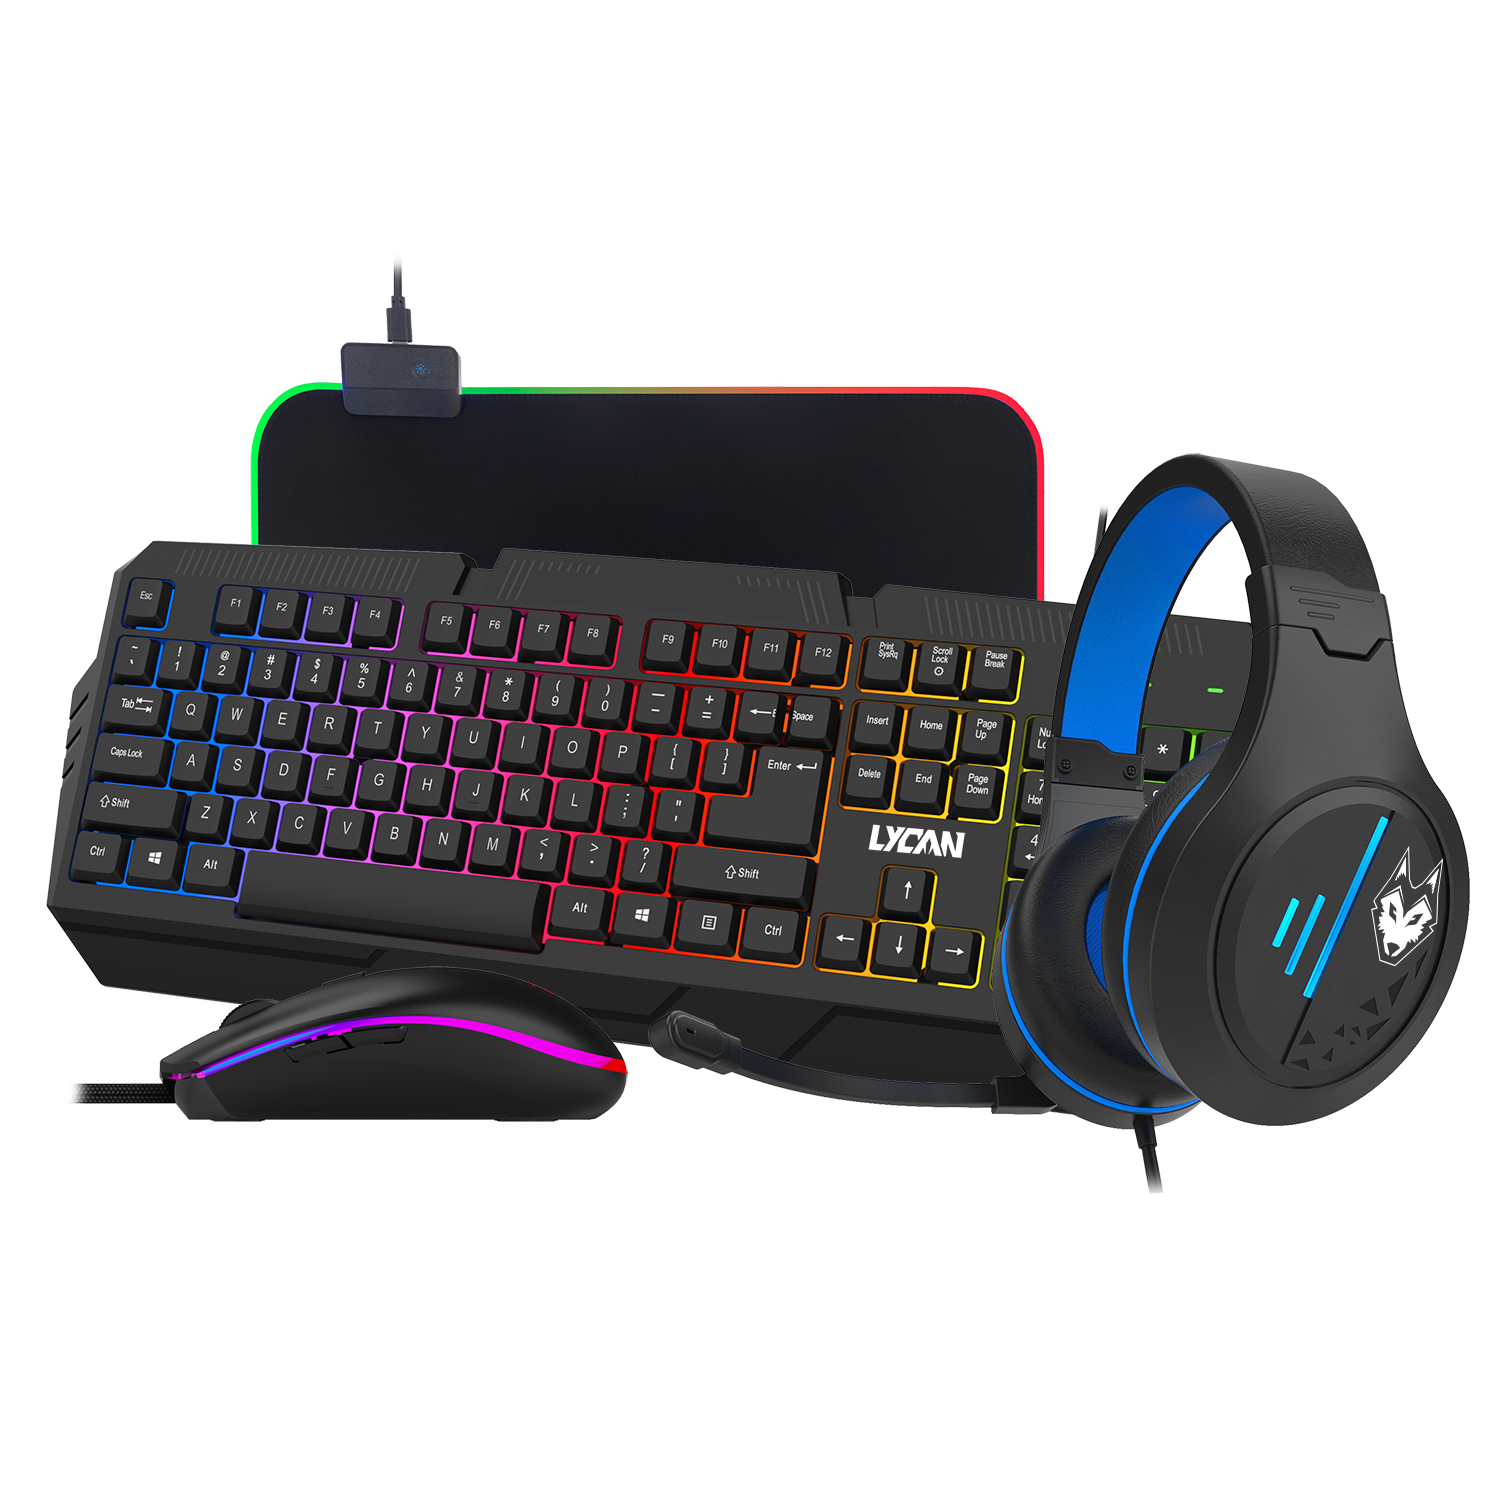 Remus Gaming Headset, Keyboard, Mouse & Pad Combo